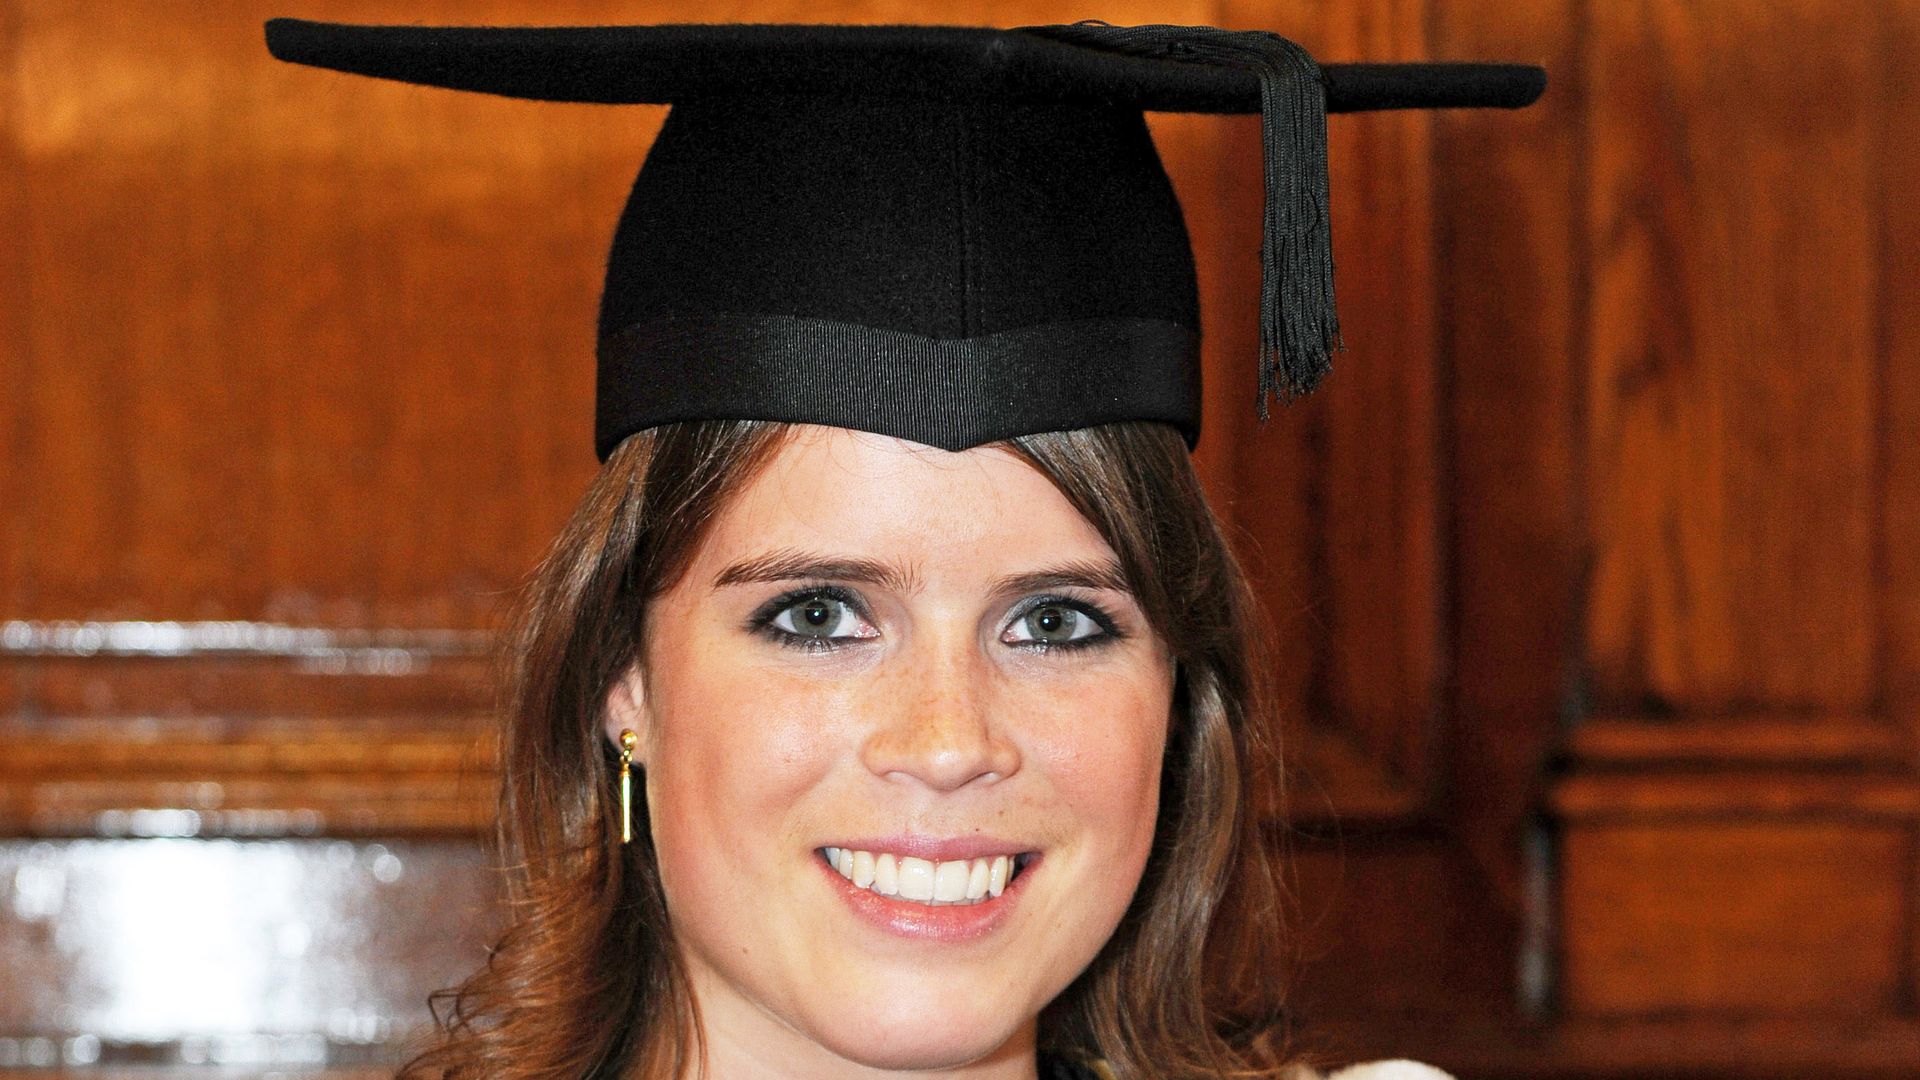 Princess Eugenie on the day of her graduation